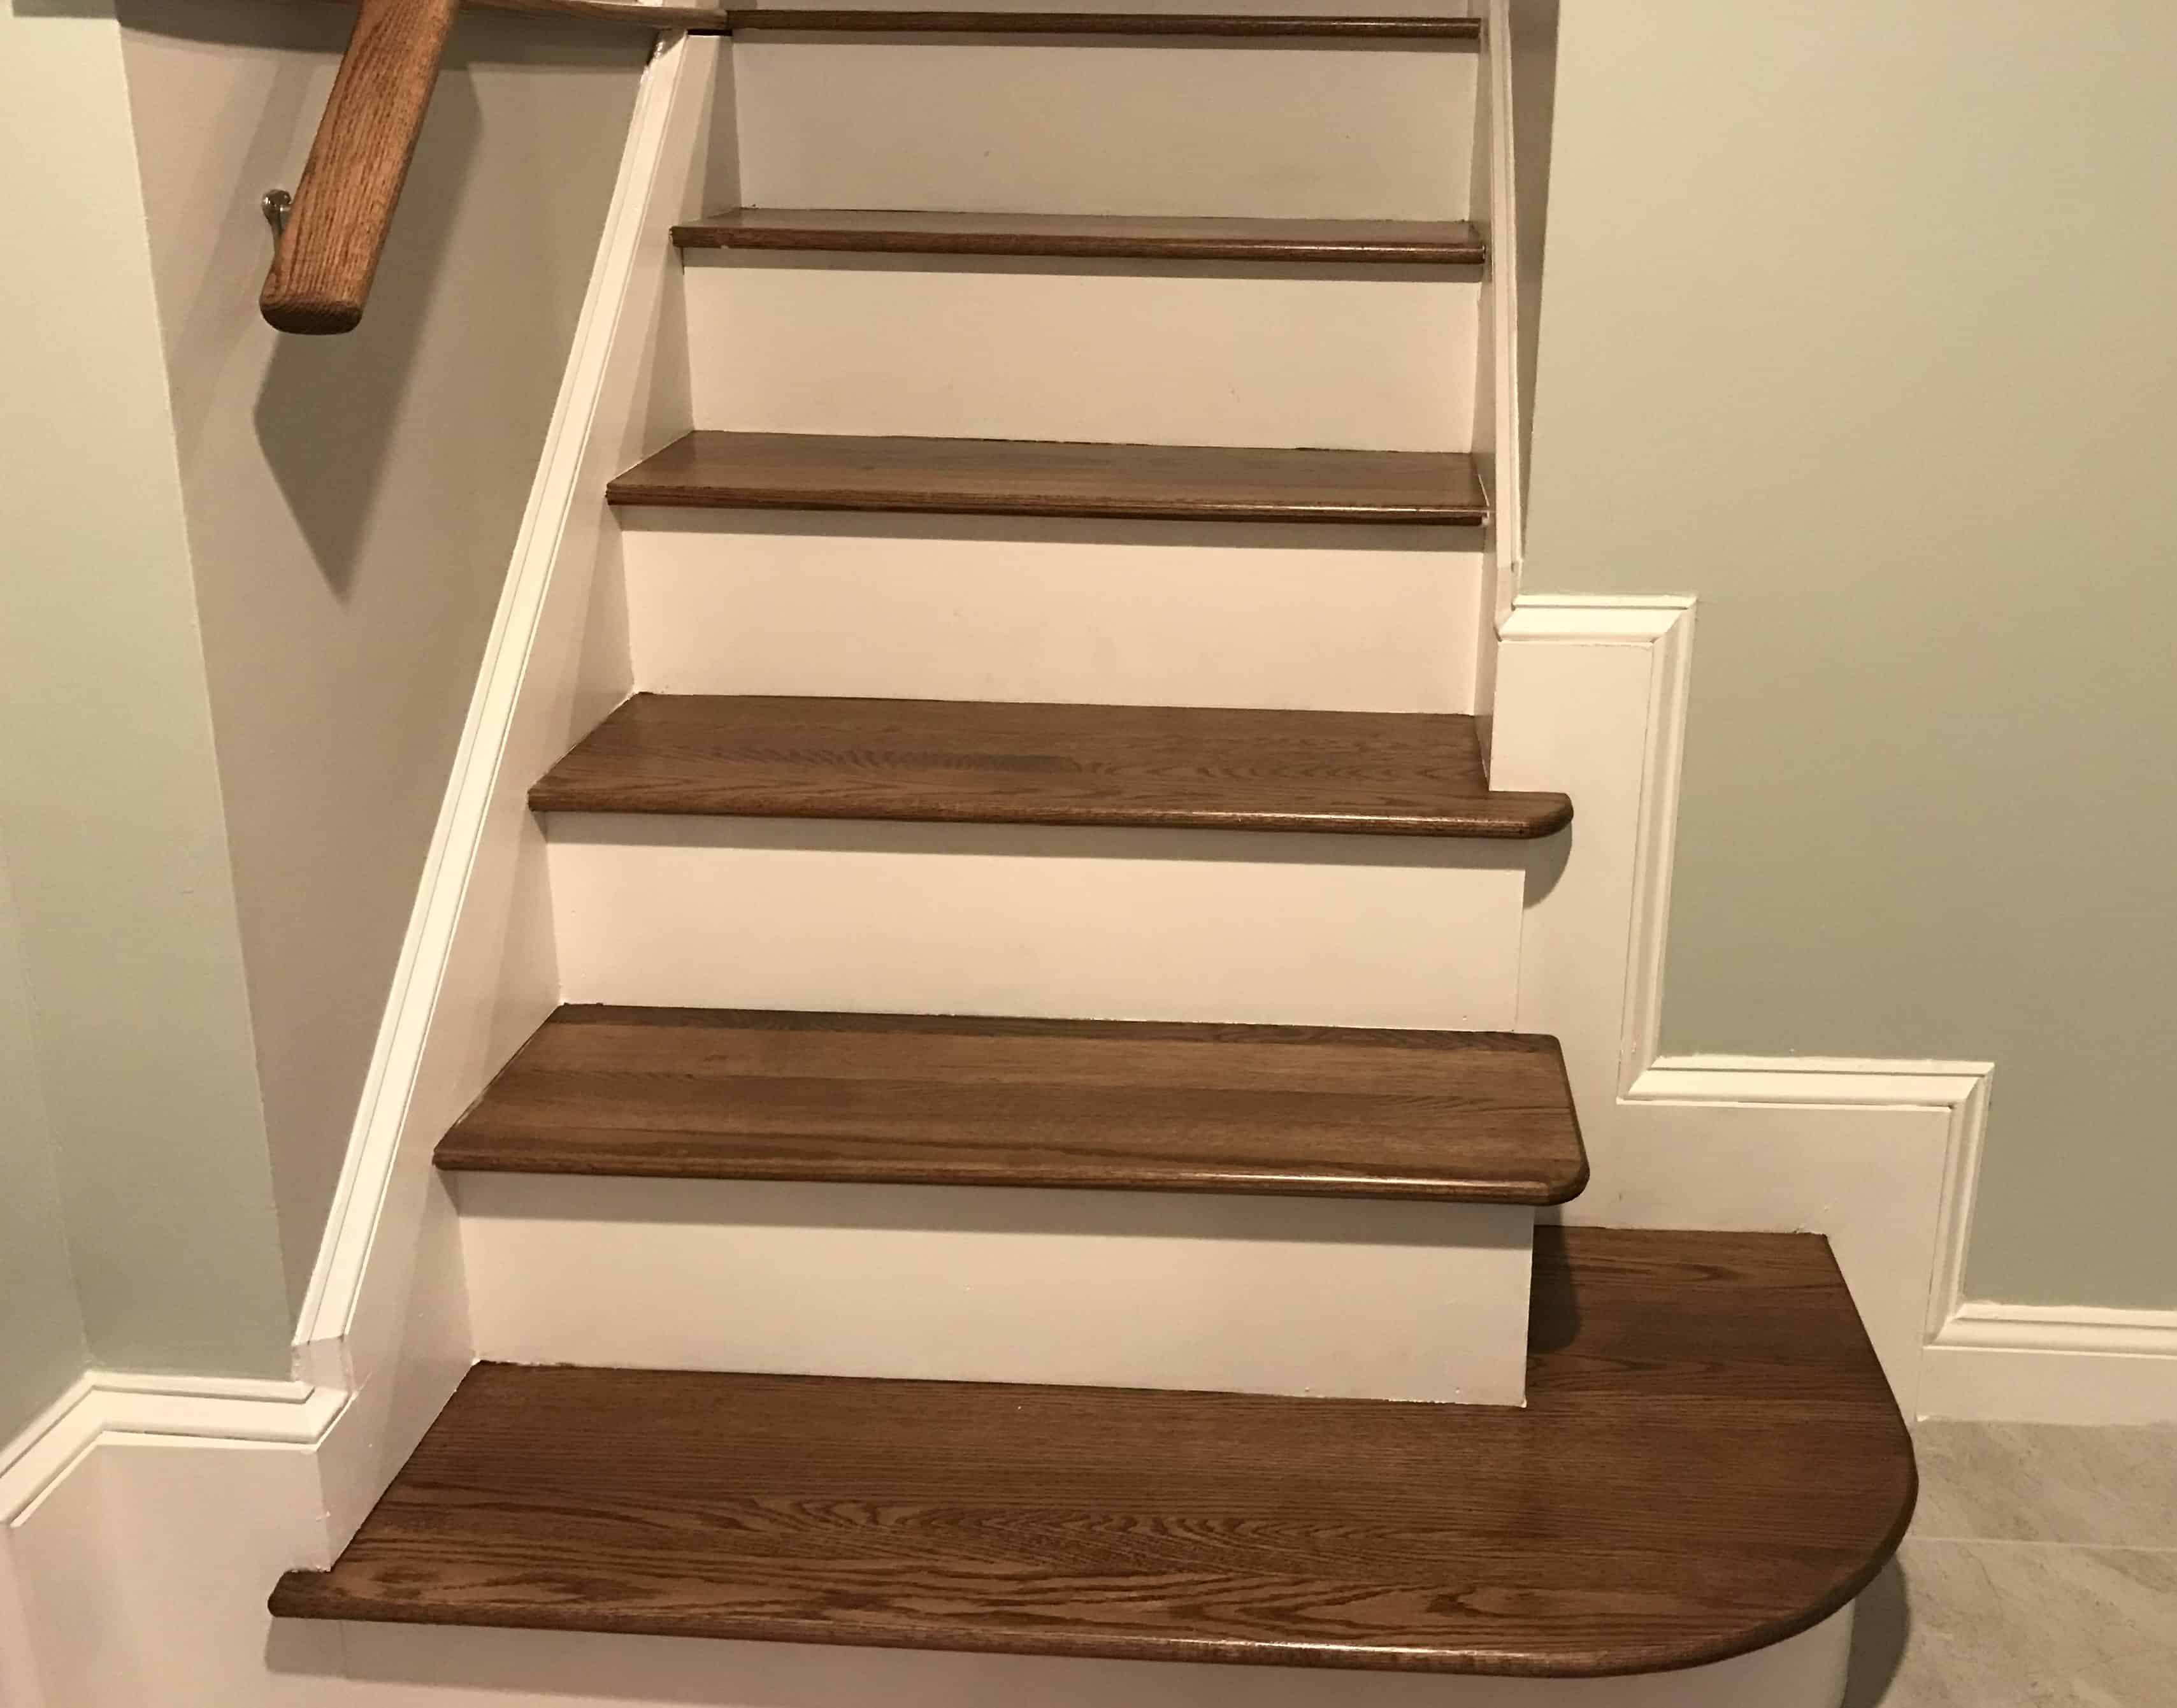 How To Make Wood Stairs Not Slippery